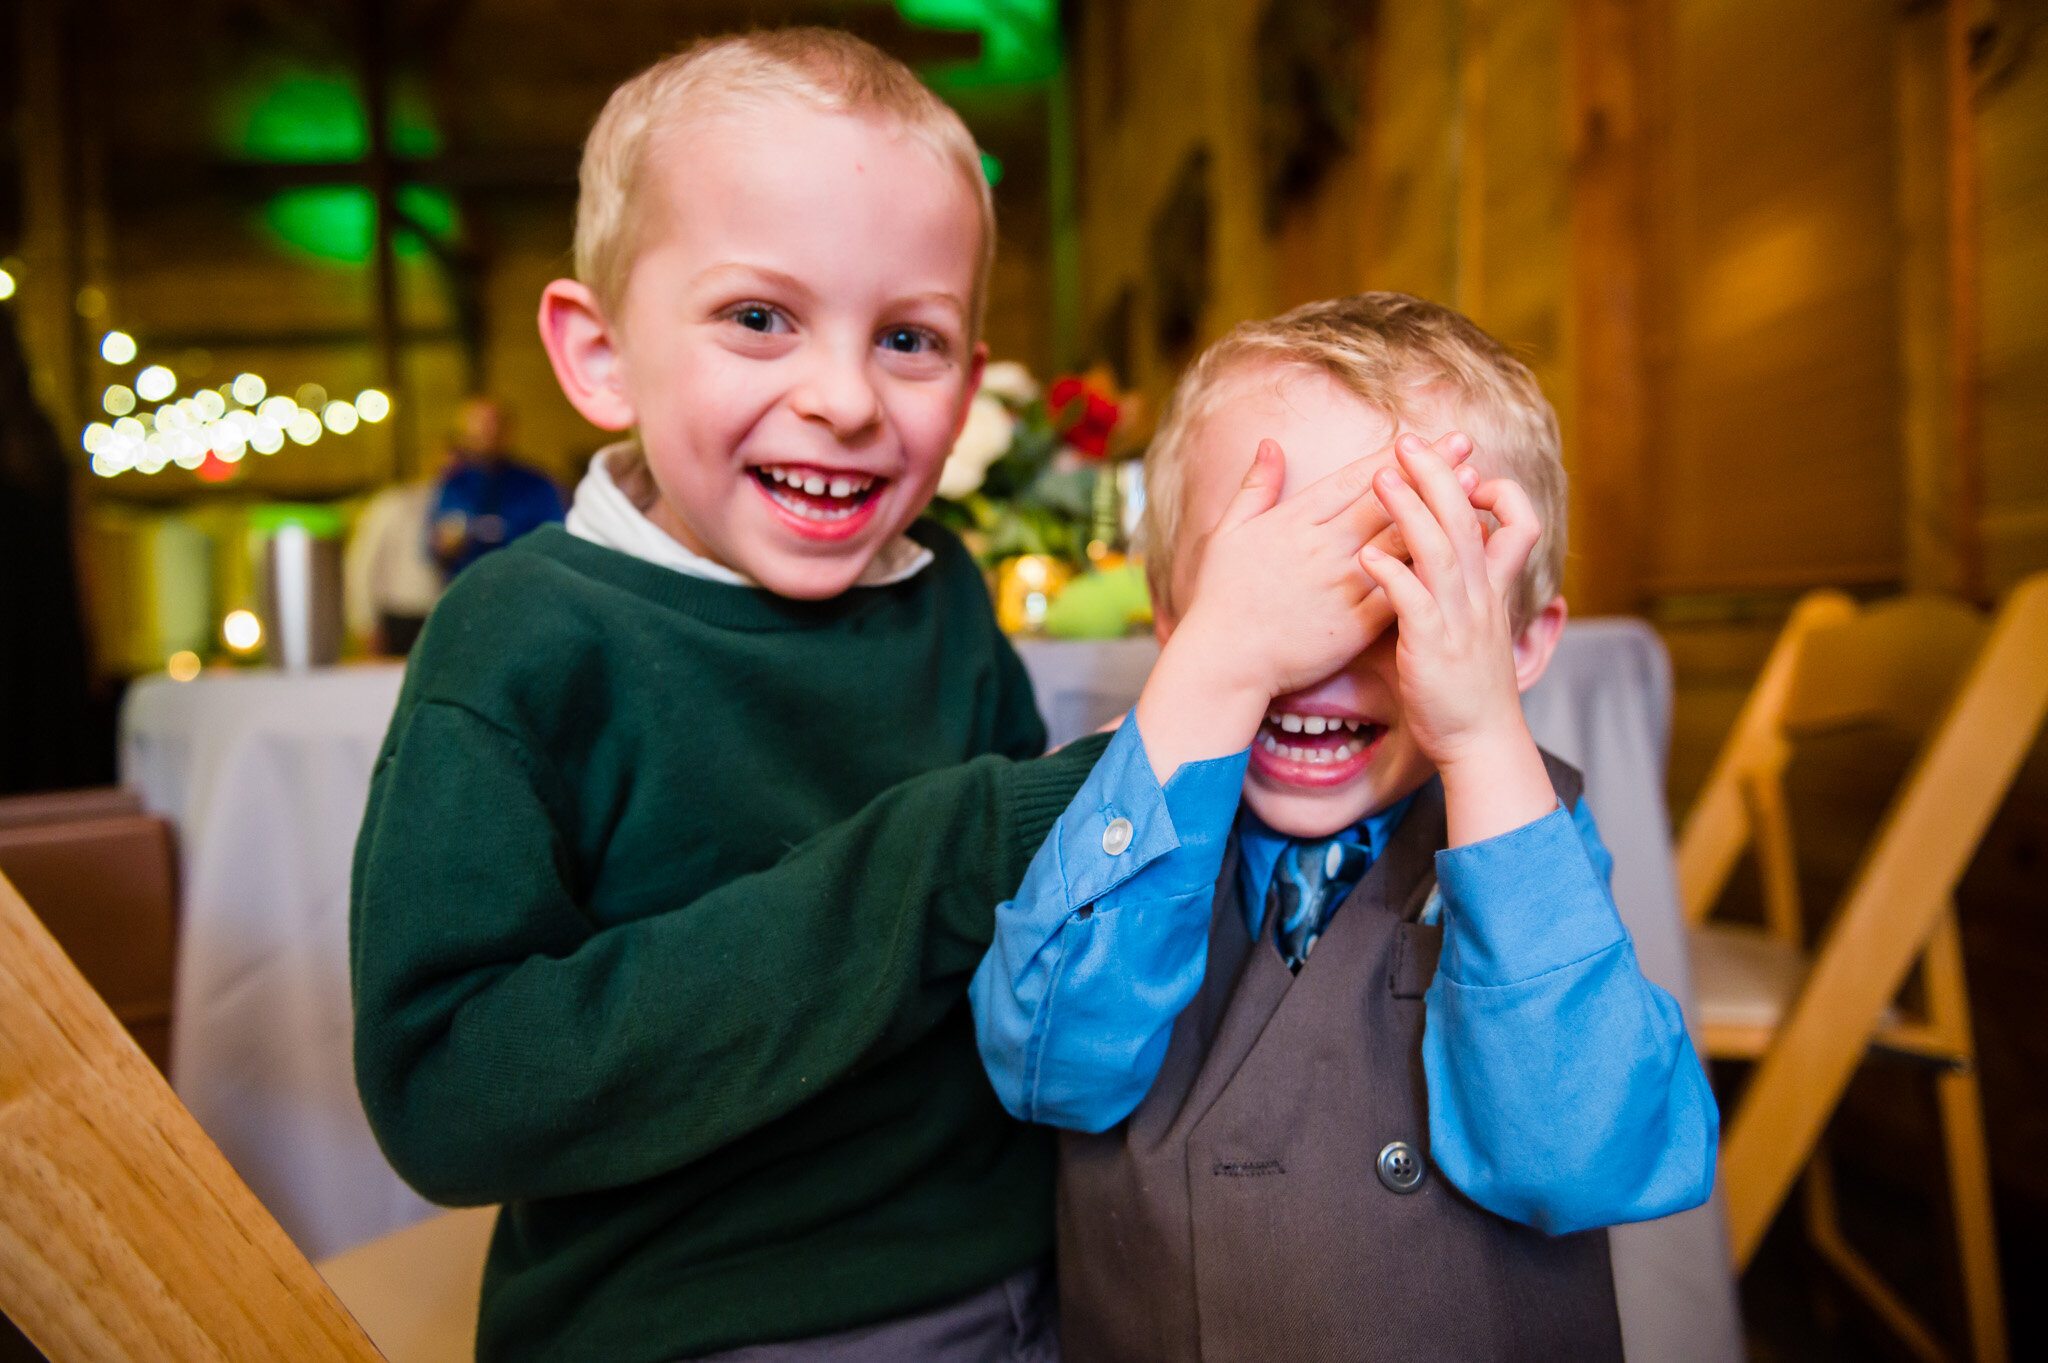 Kids playing at a wedding reception